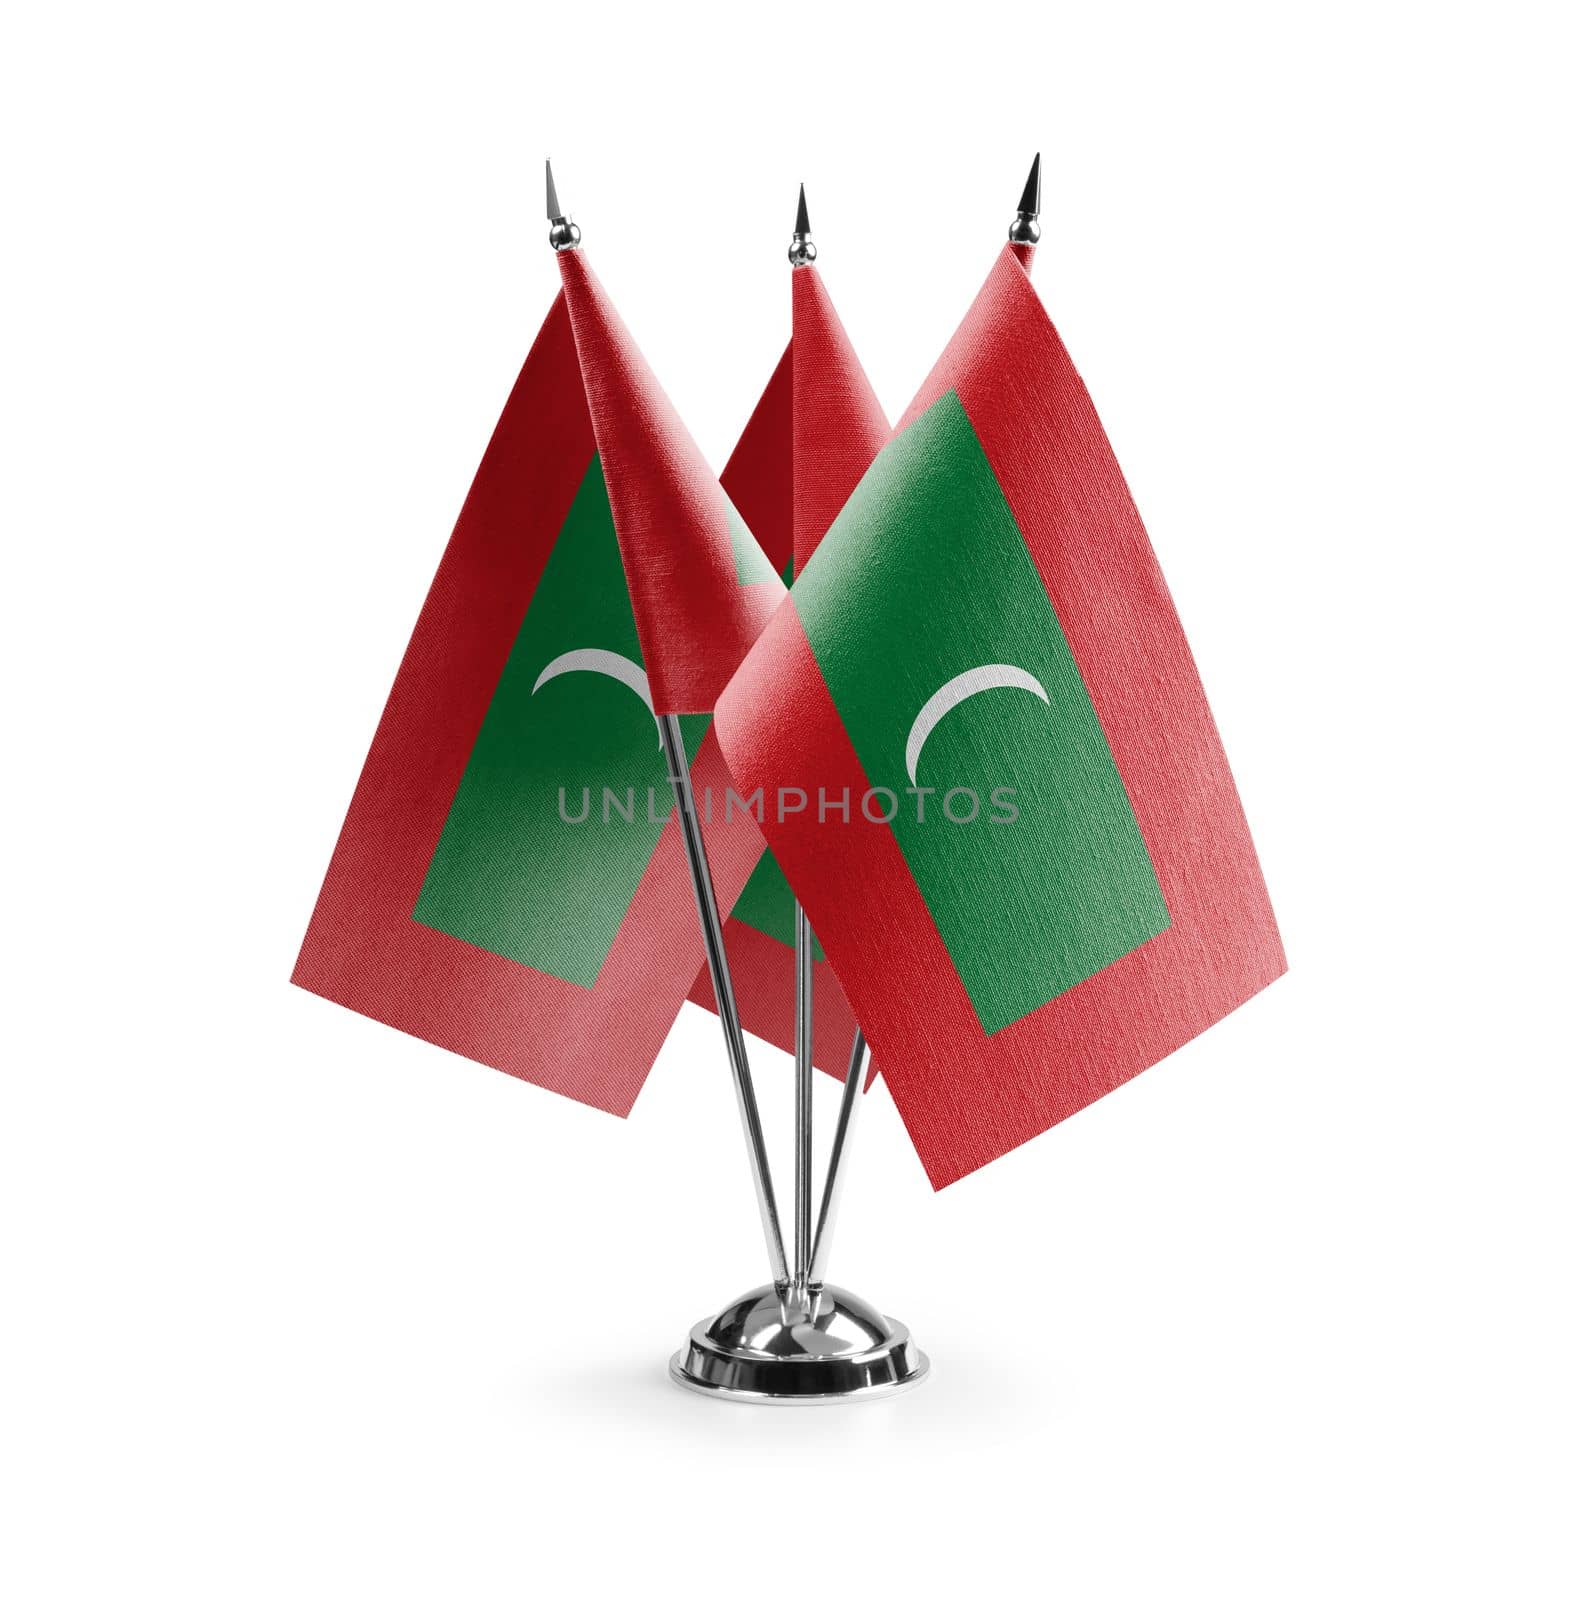 Small national flags of the Maldives on a white background.